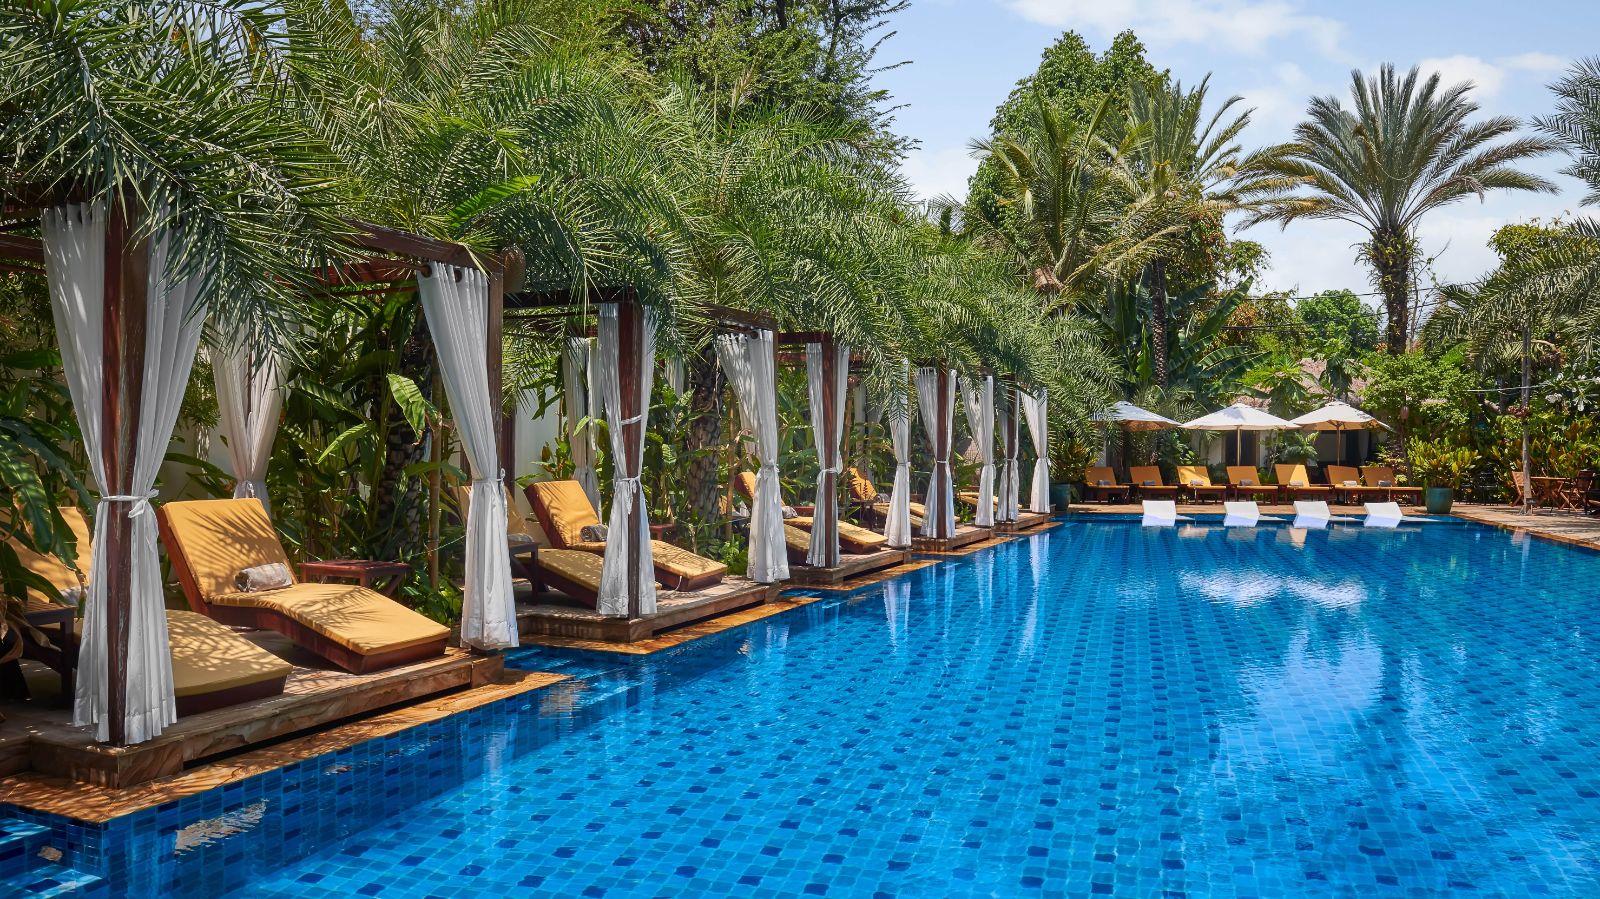 Poolside at Palace Gate Hotel in Phnom Penh, Cambodia